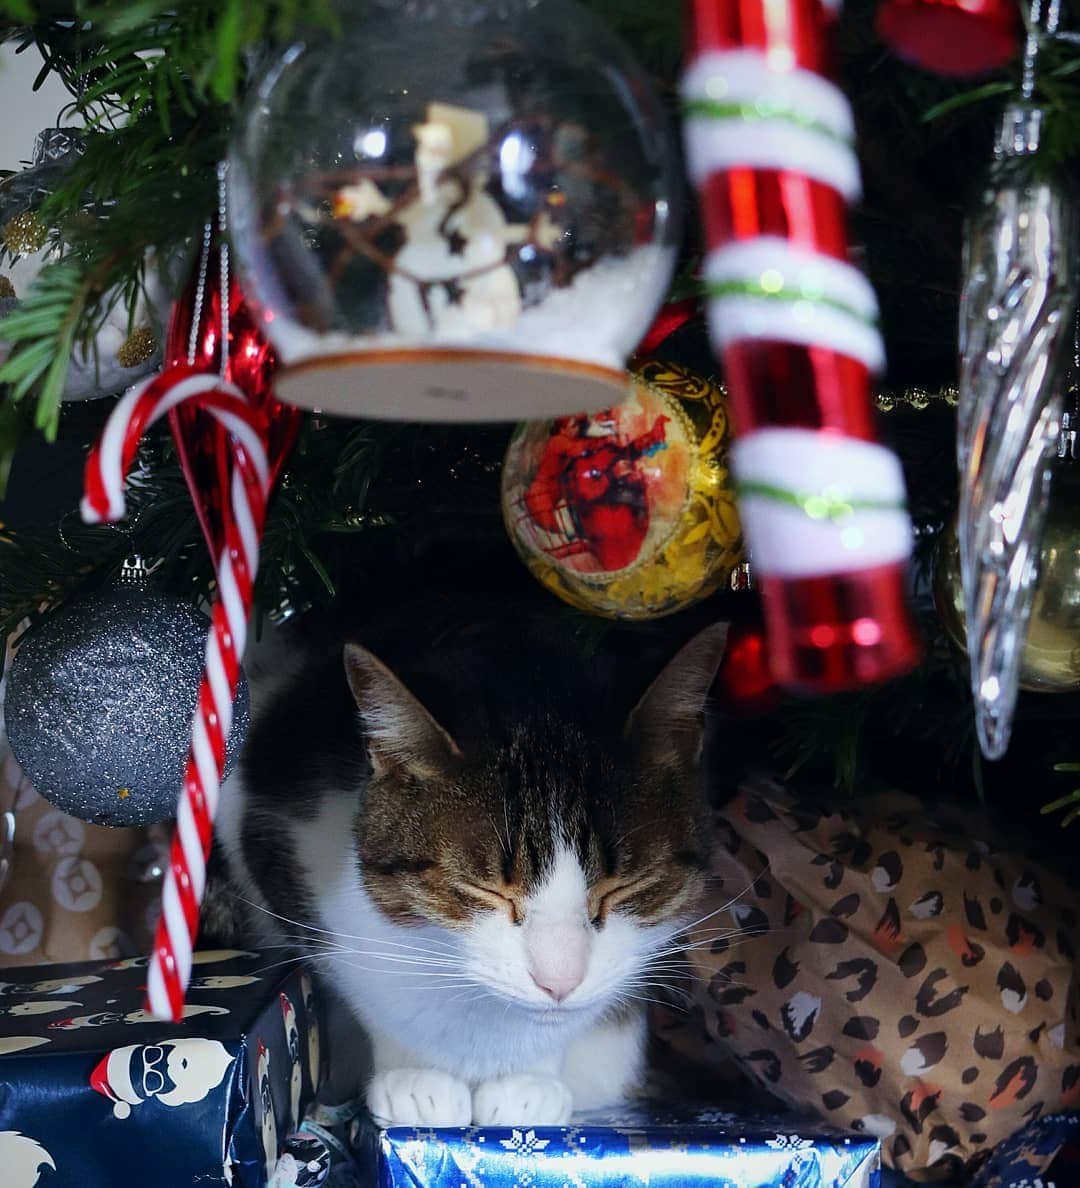 Homer Le Miaou & Nugget La Nugのインスタグラム：「I'm going to sleep under the tree so i can catch Santa and share some milk with him! I'm soooooo excited hehe! 🎅😽😷 #GiveHimTunaInsteadOfCookies Wishing you all a happy and safe Catmas night with lots of love and fun!💖」